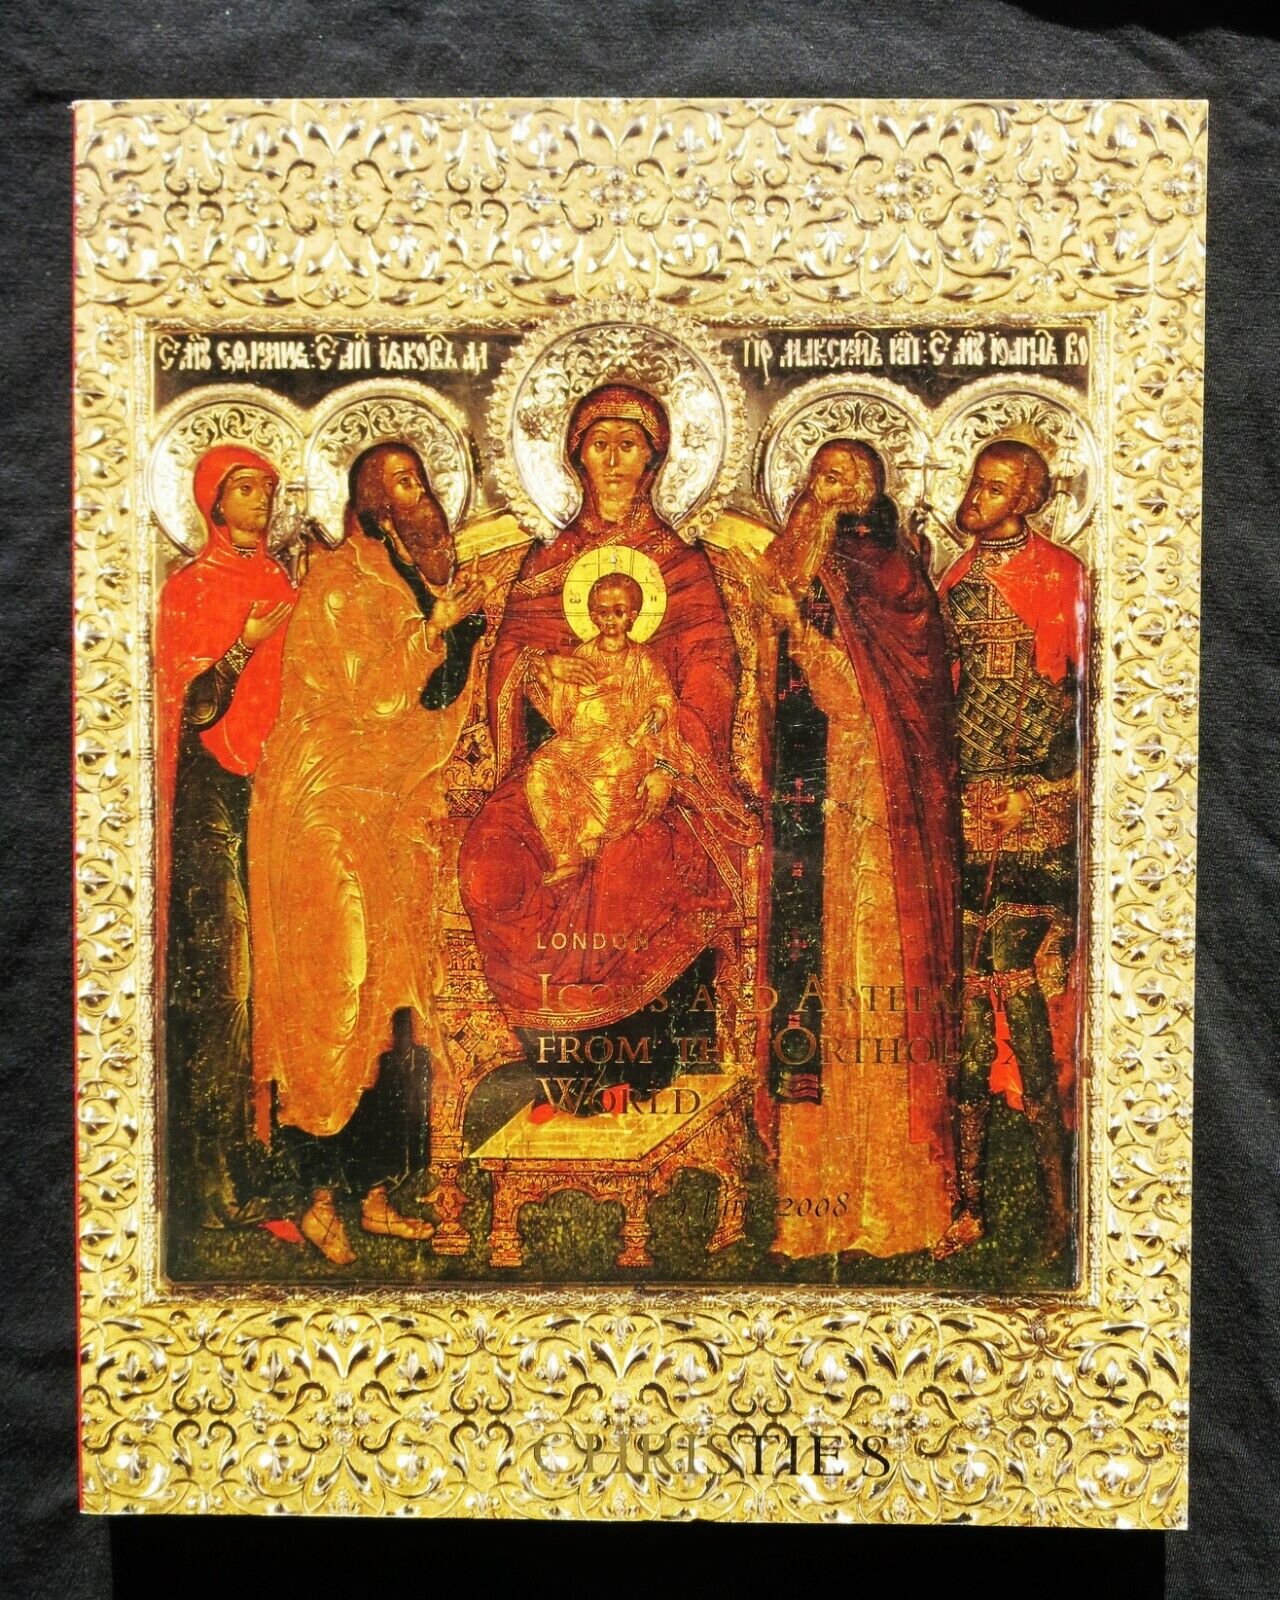 Christie's Icons & Artefacts From The Orthodox World Auction Catalog 2008